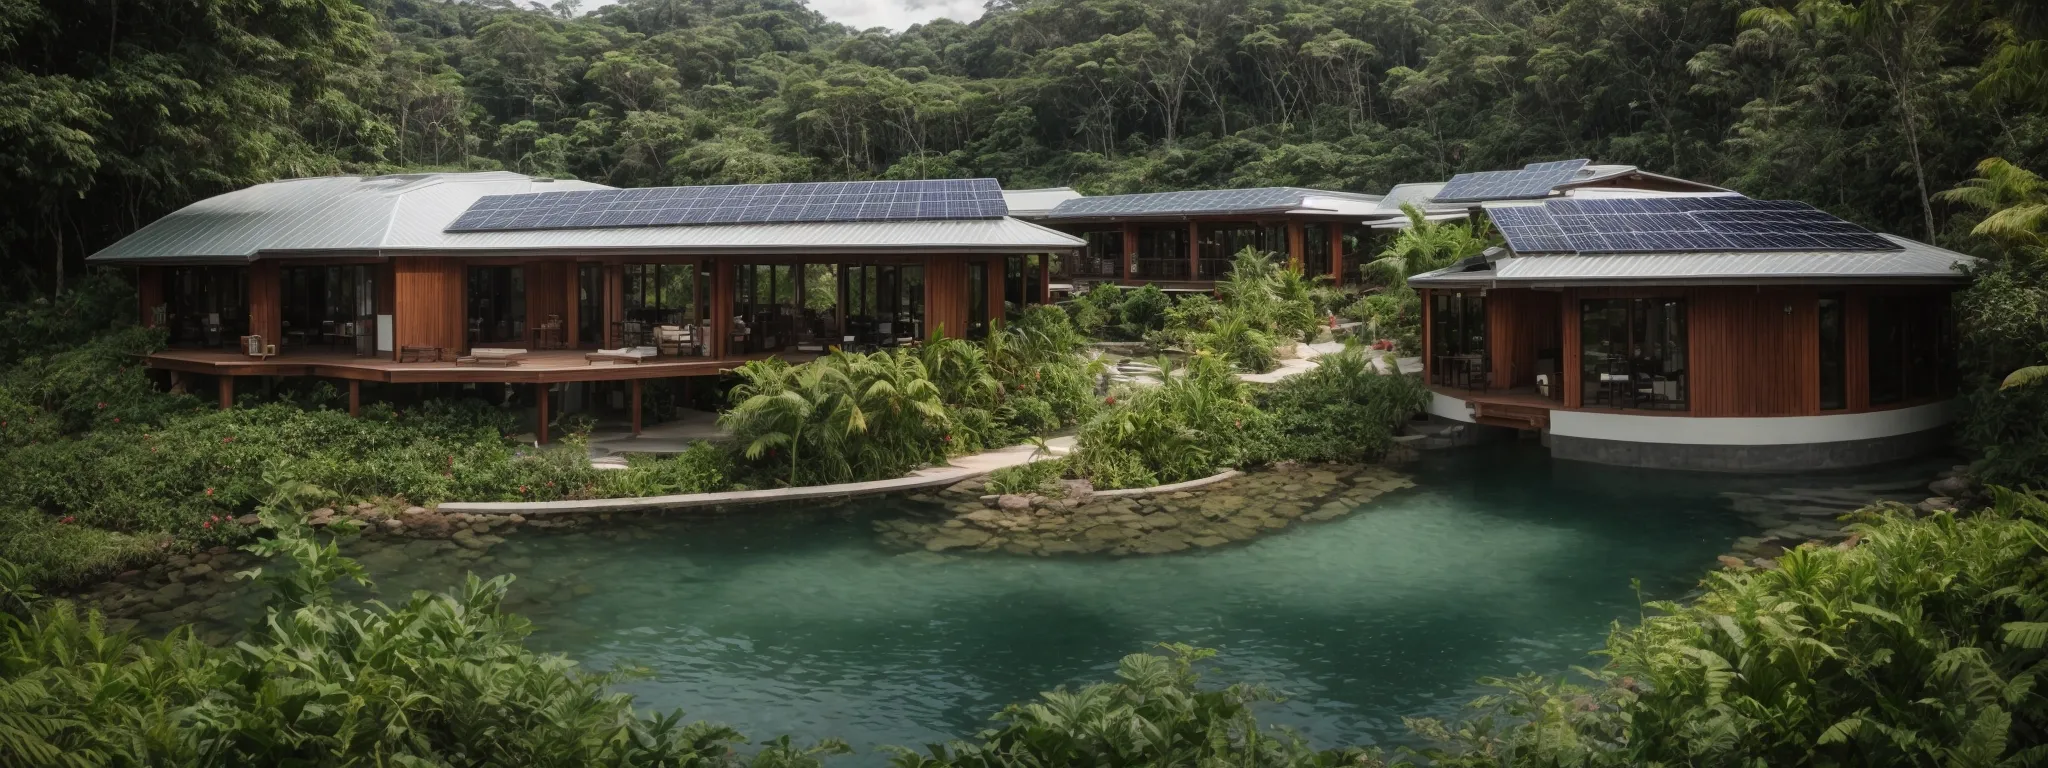 a panoramic view of an eco-friendly resort nestled amidst lush greenery, powered by solar panels and featuring a water recycling facility.